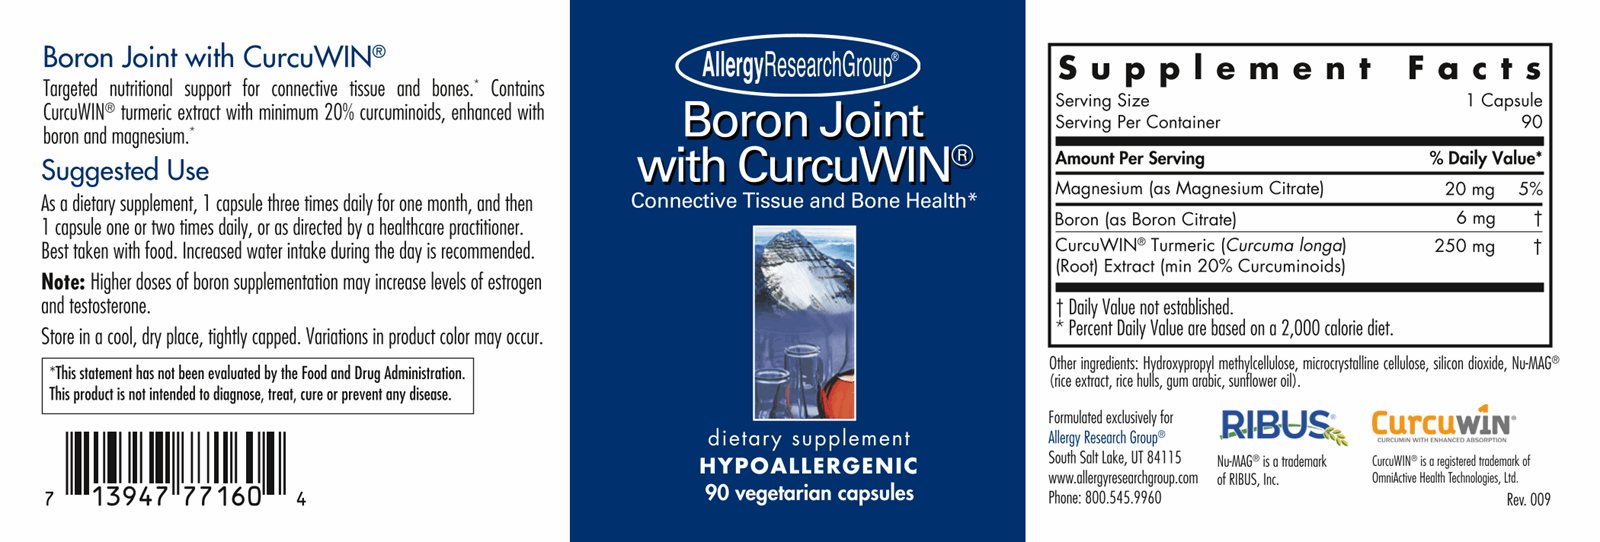 Boron Joint with CurcuWIN® 